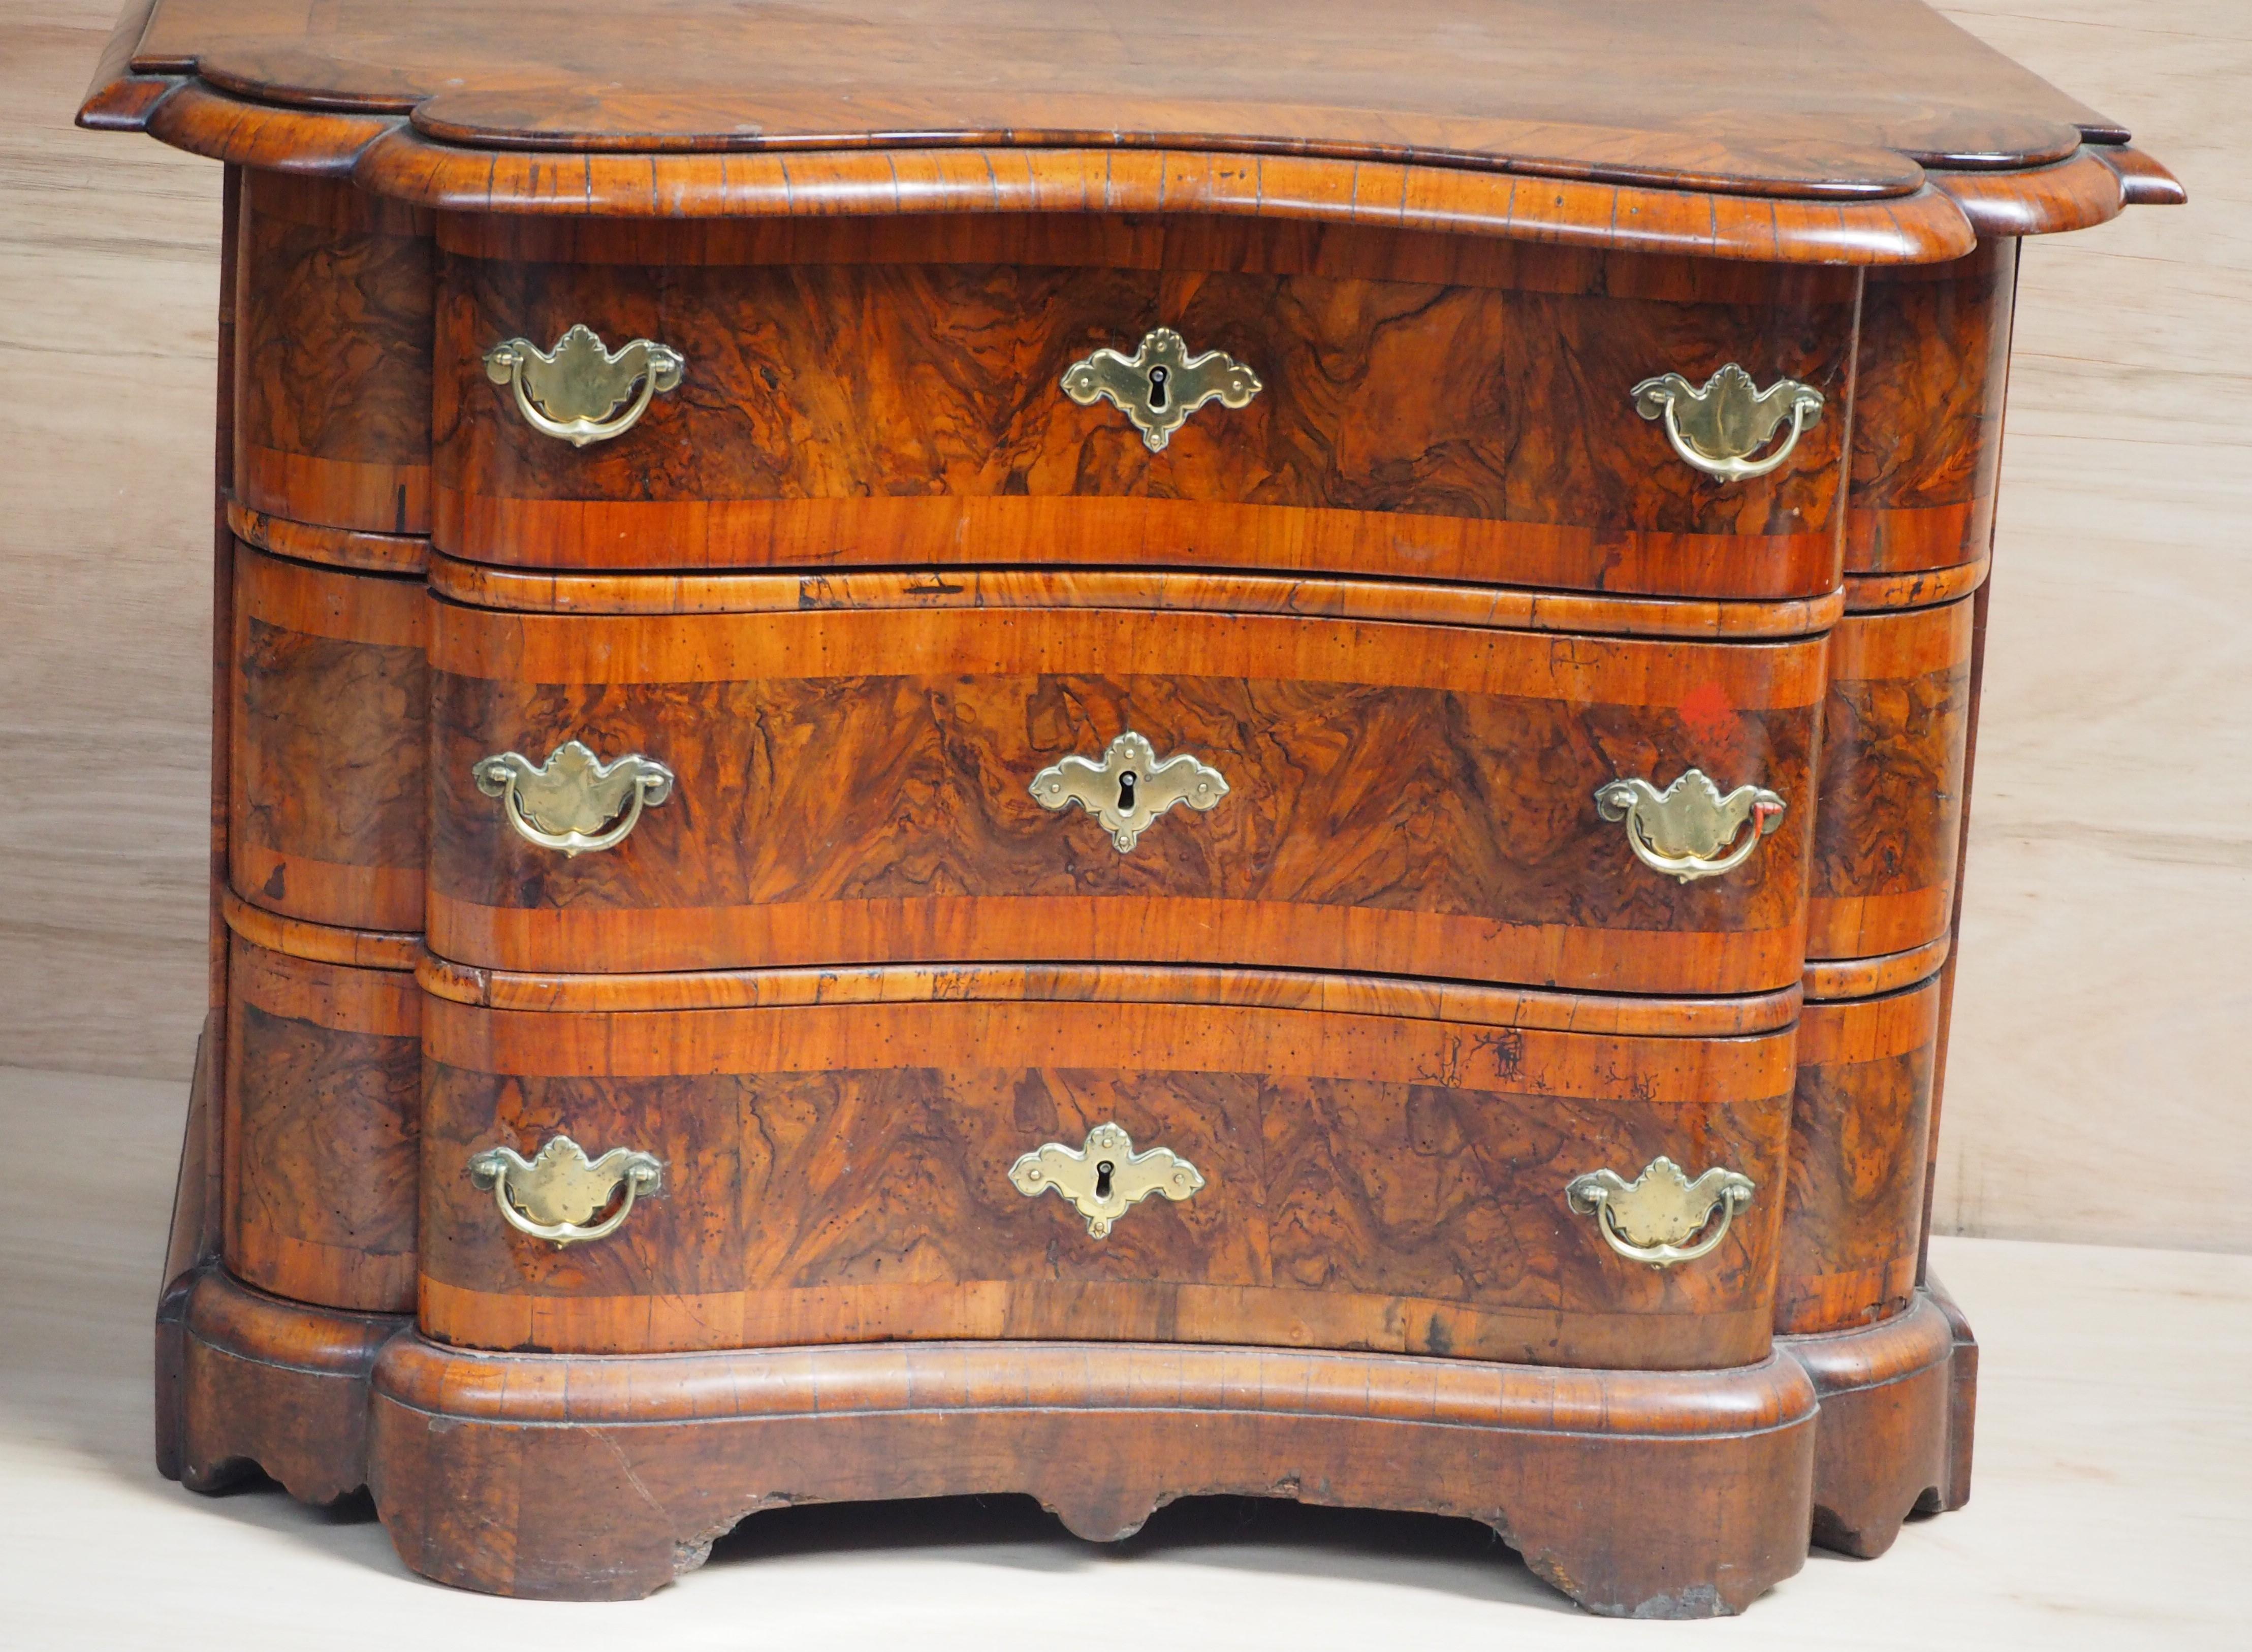 This small Baroque Venetian Commode/Chest of three long drawers is of good proportions, has a strong burl walnut of good colour and patina.,  A good and useful height with three commodious drawers.  With the original working locks . .
More